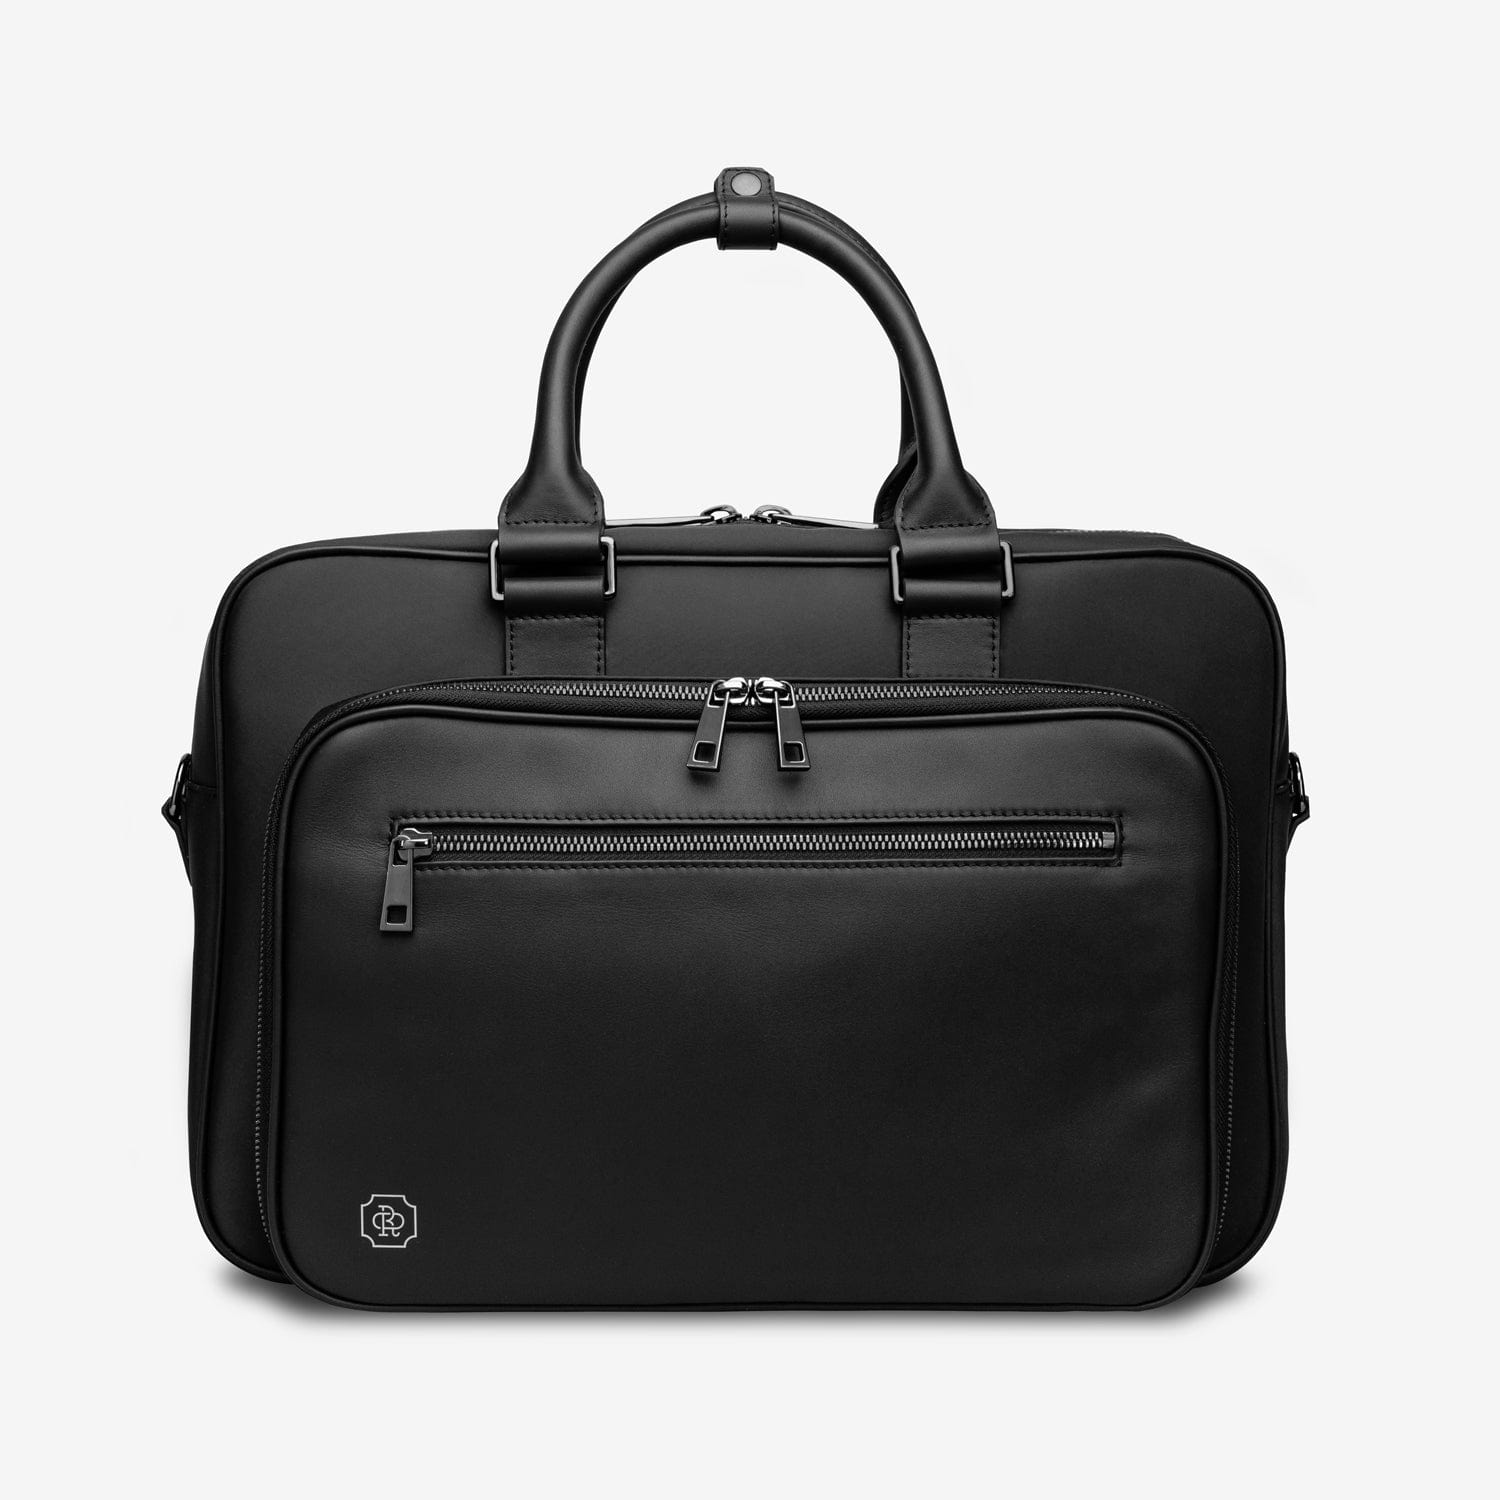 Alto Briefcase - Most Functional Briefcase for Men from Oak & Rove